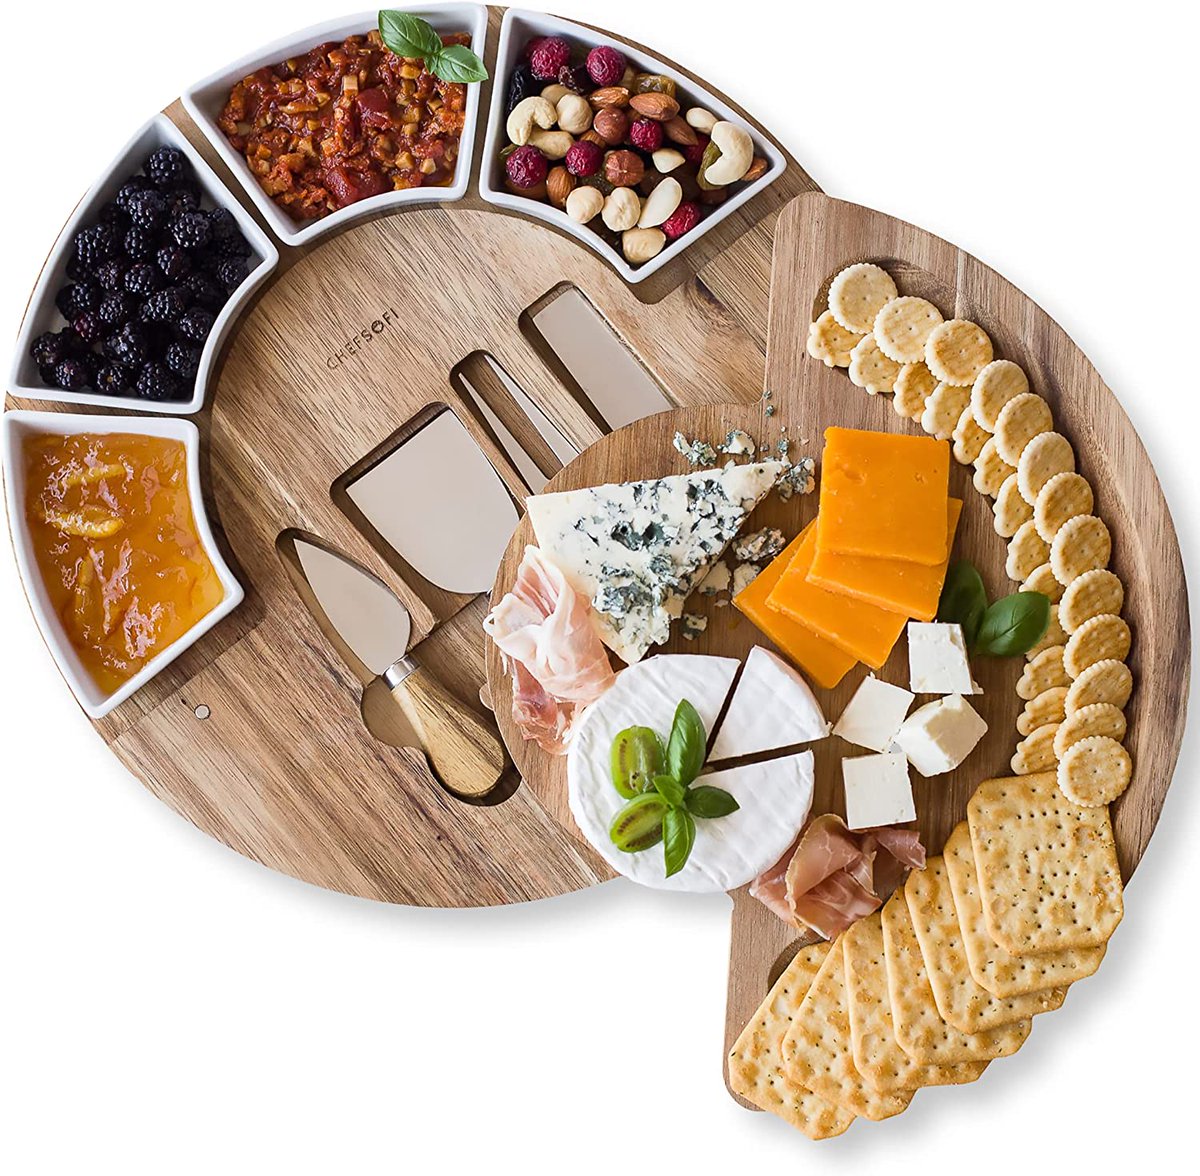 Don't miss this 🔥 DEAL!

Charcuterie Board Set and Cheese Serving Platter
🔥45% OFF!!!  Retail: $72, Only $39.86

amzn.to/405zoQj

#charcuterieboard #cheeseplatter #Entertainment #dailydeals #amazon #kitchenware